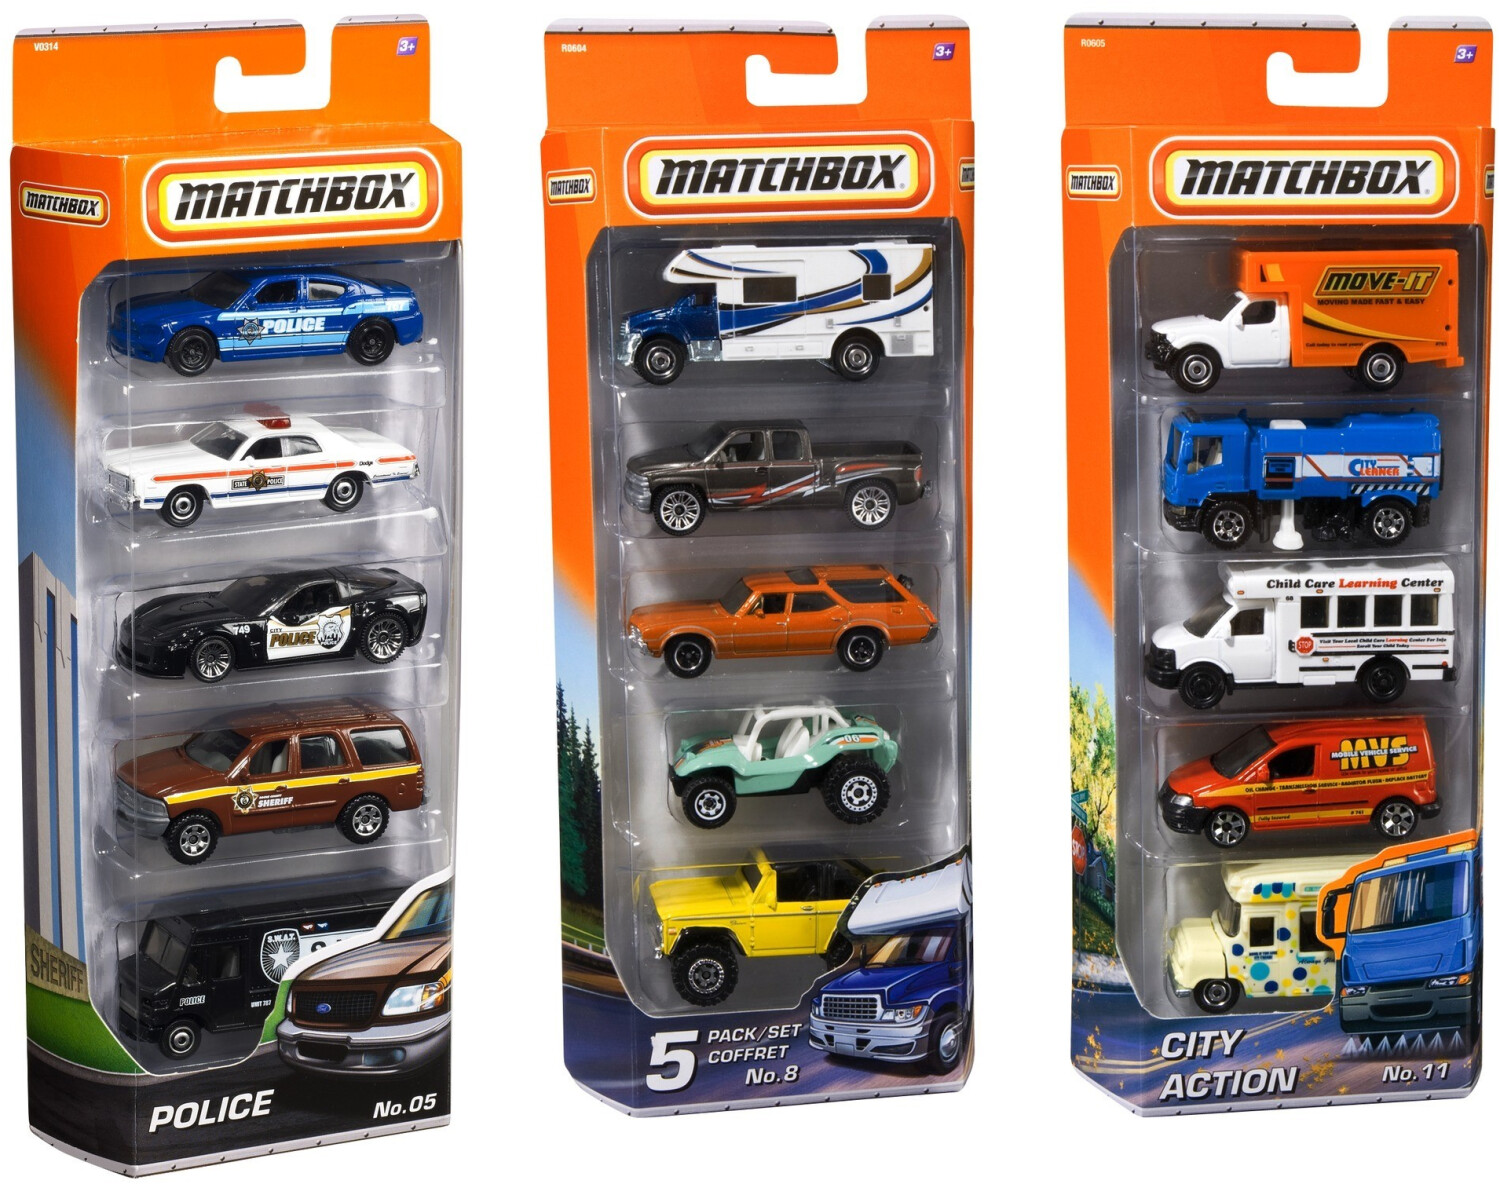 Buy Matchbox Set of 5 Vehicles from £7.99 (Today) Best Deals on